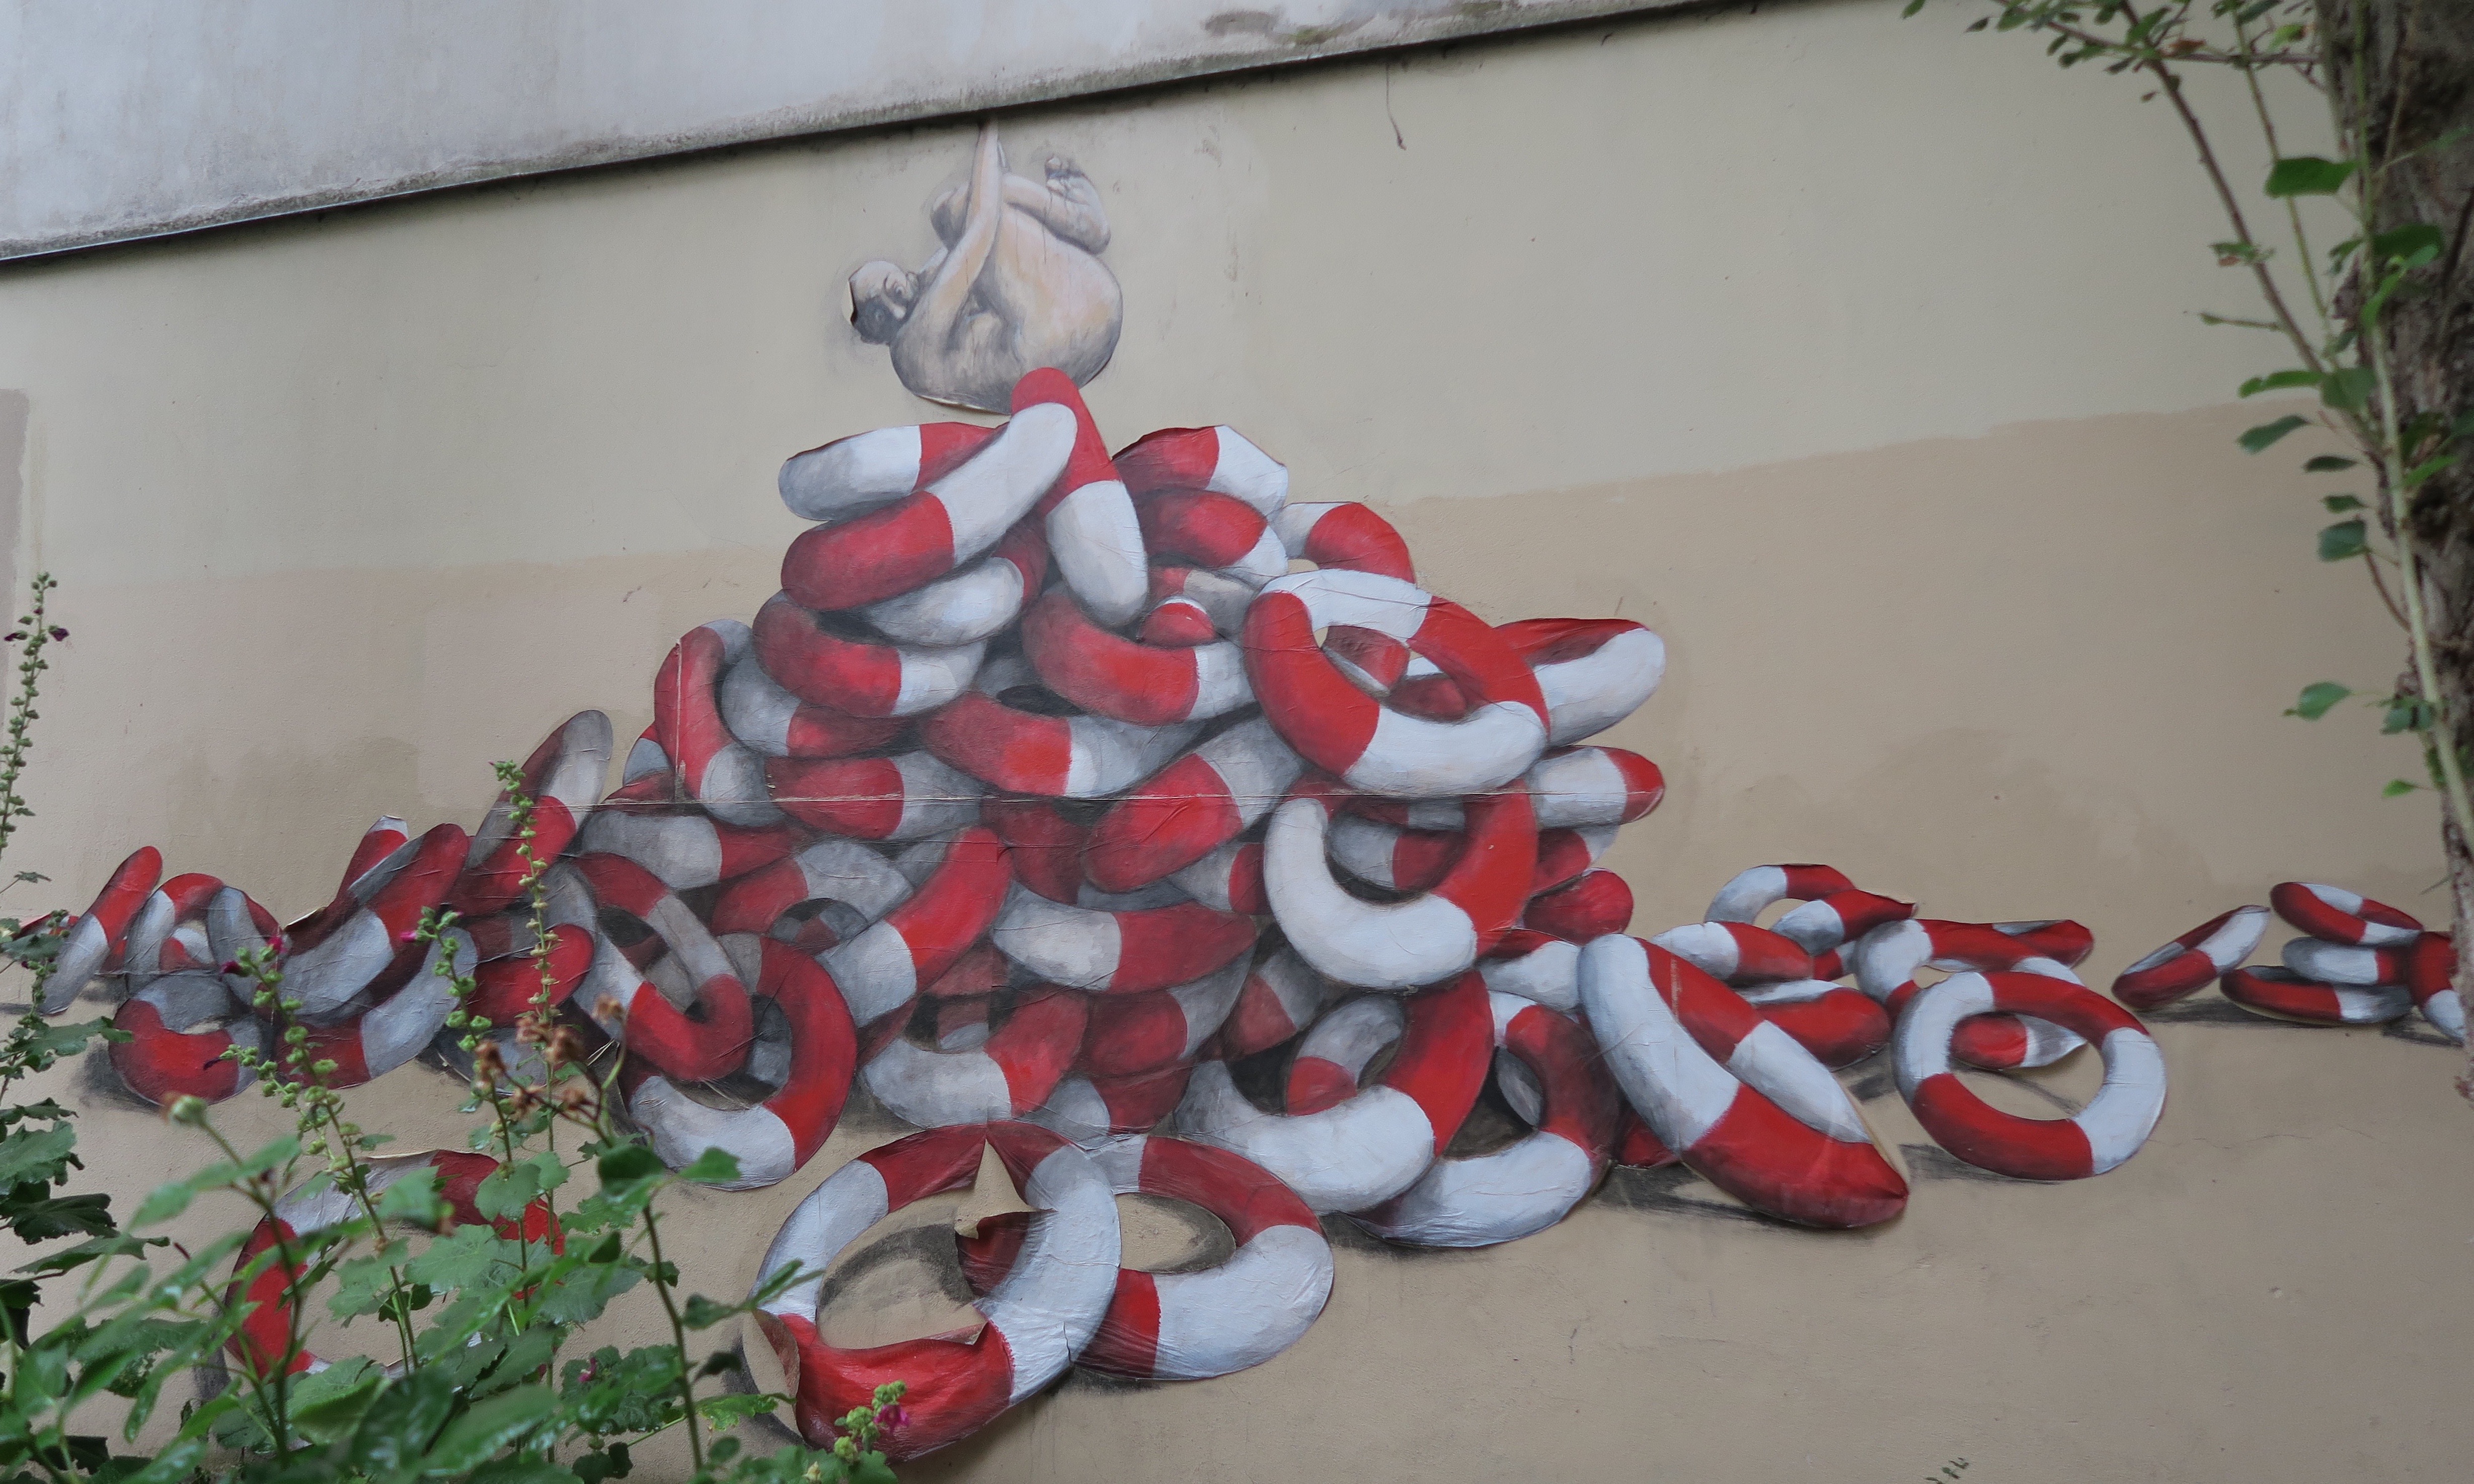 Street art by Philippe Girard with his signature life saver rings, Belleville